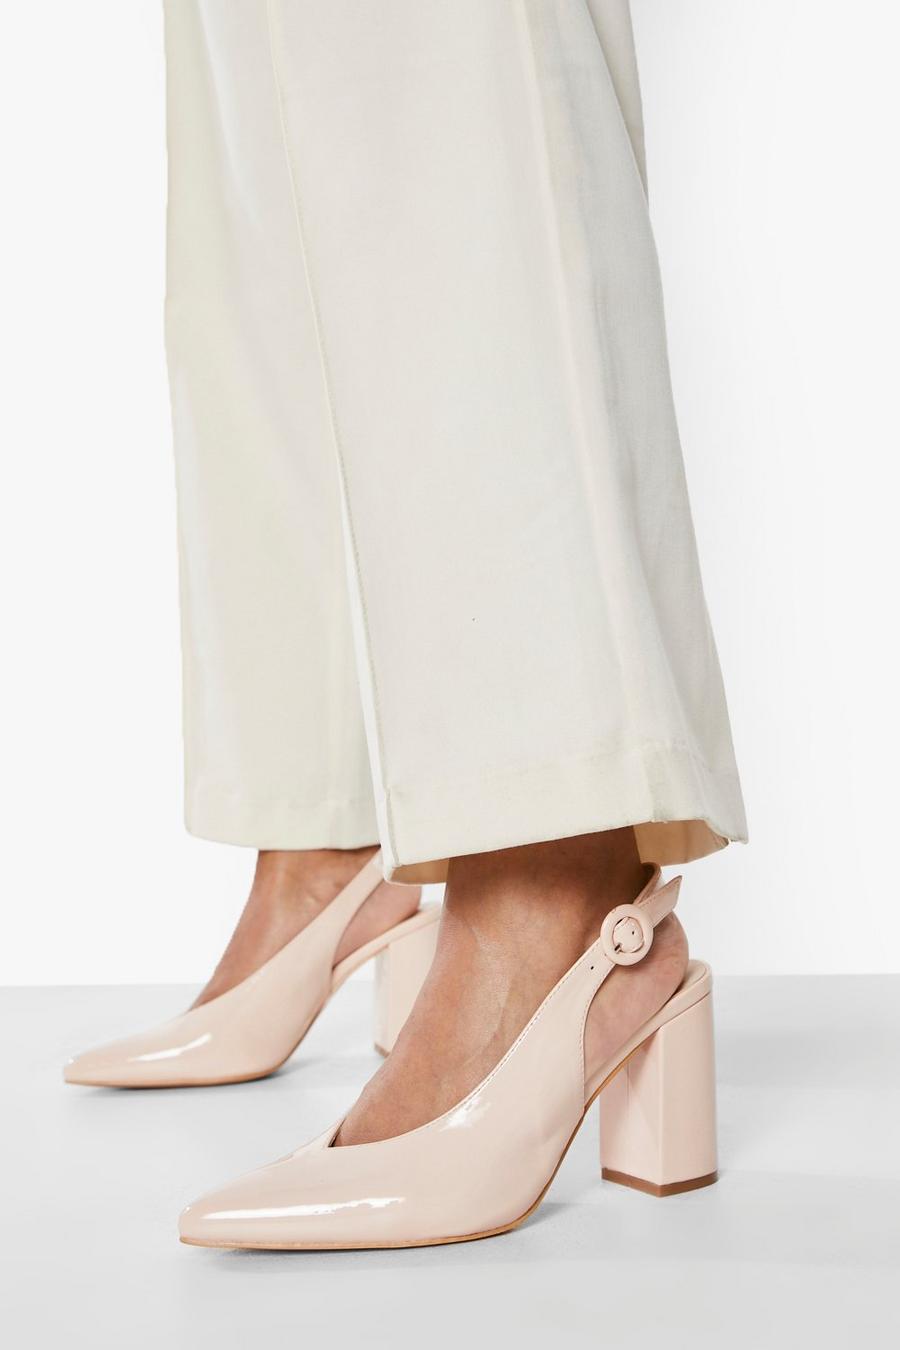 Nude Slingback Patent Pointed Toe Court